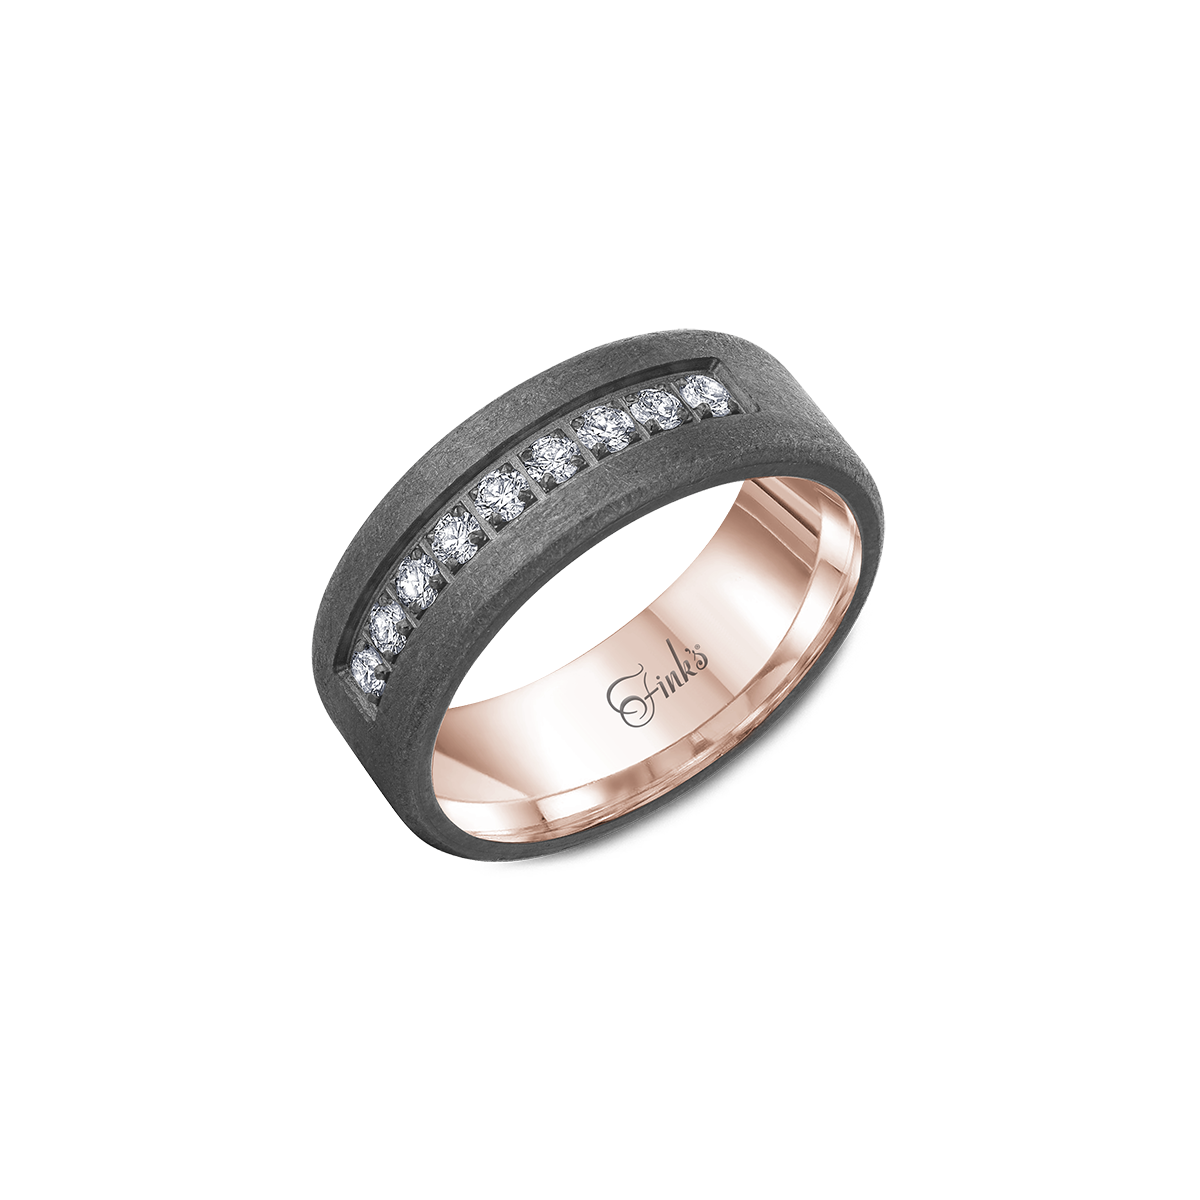 Fink's Rose Gold and Tantalum Wedding Band with Diamonds